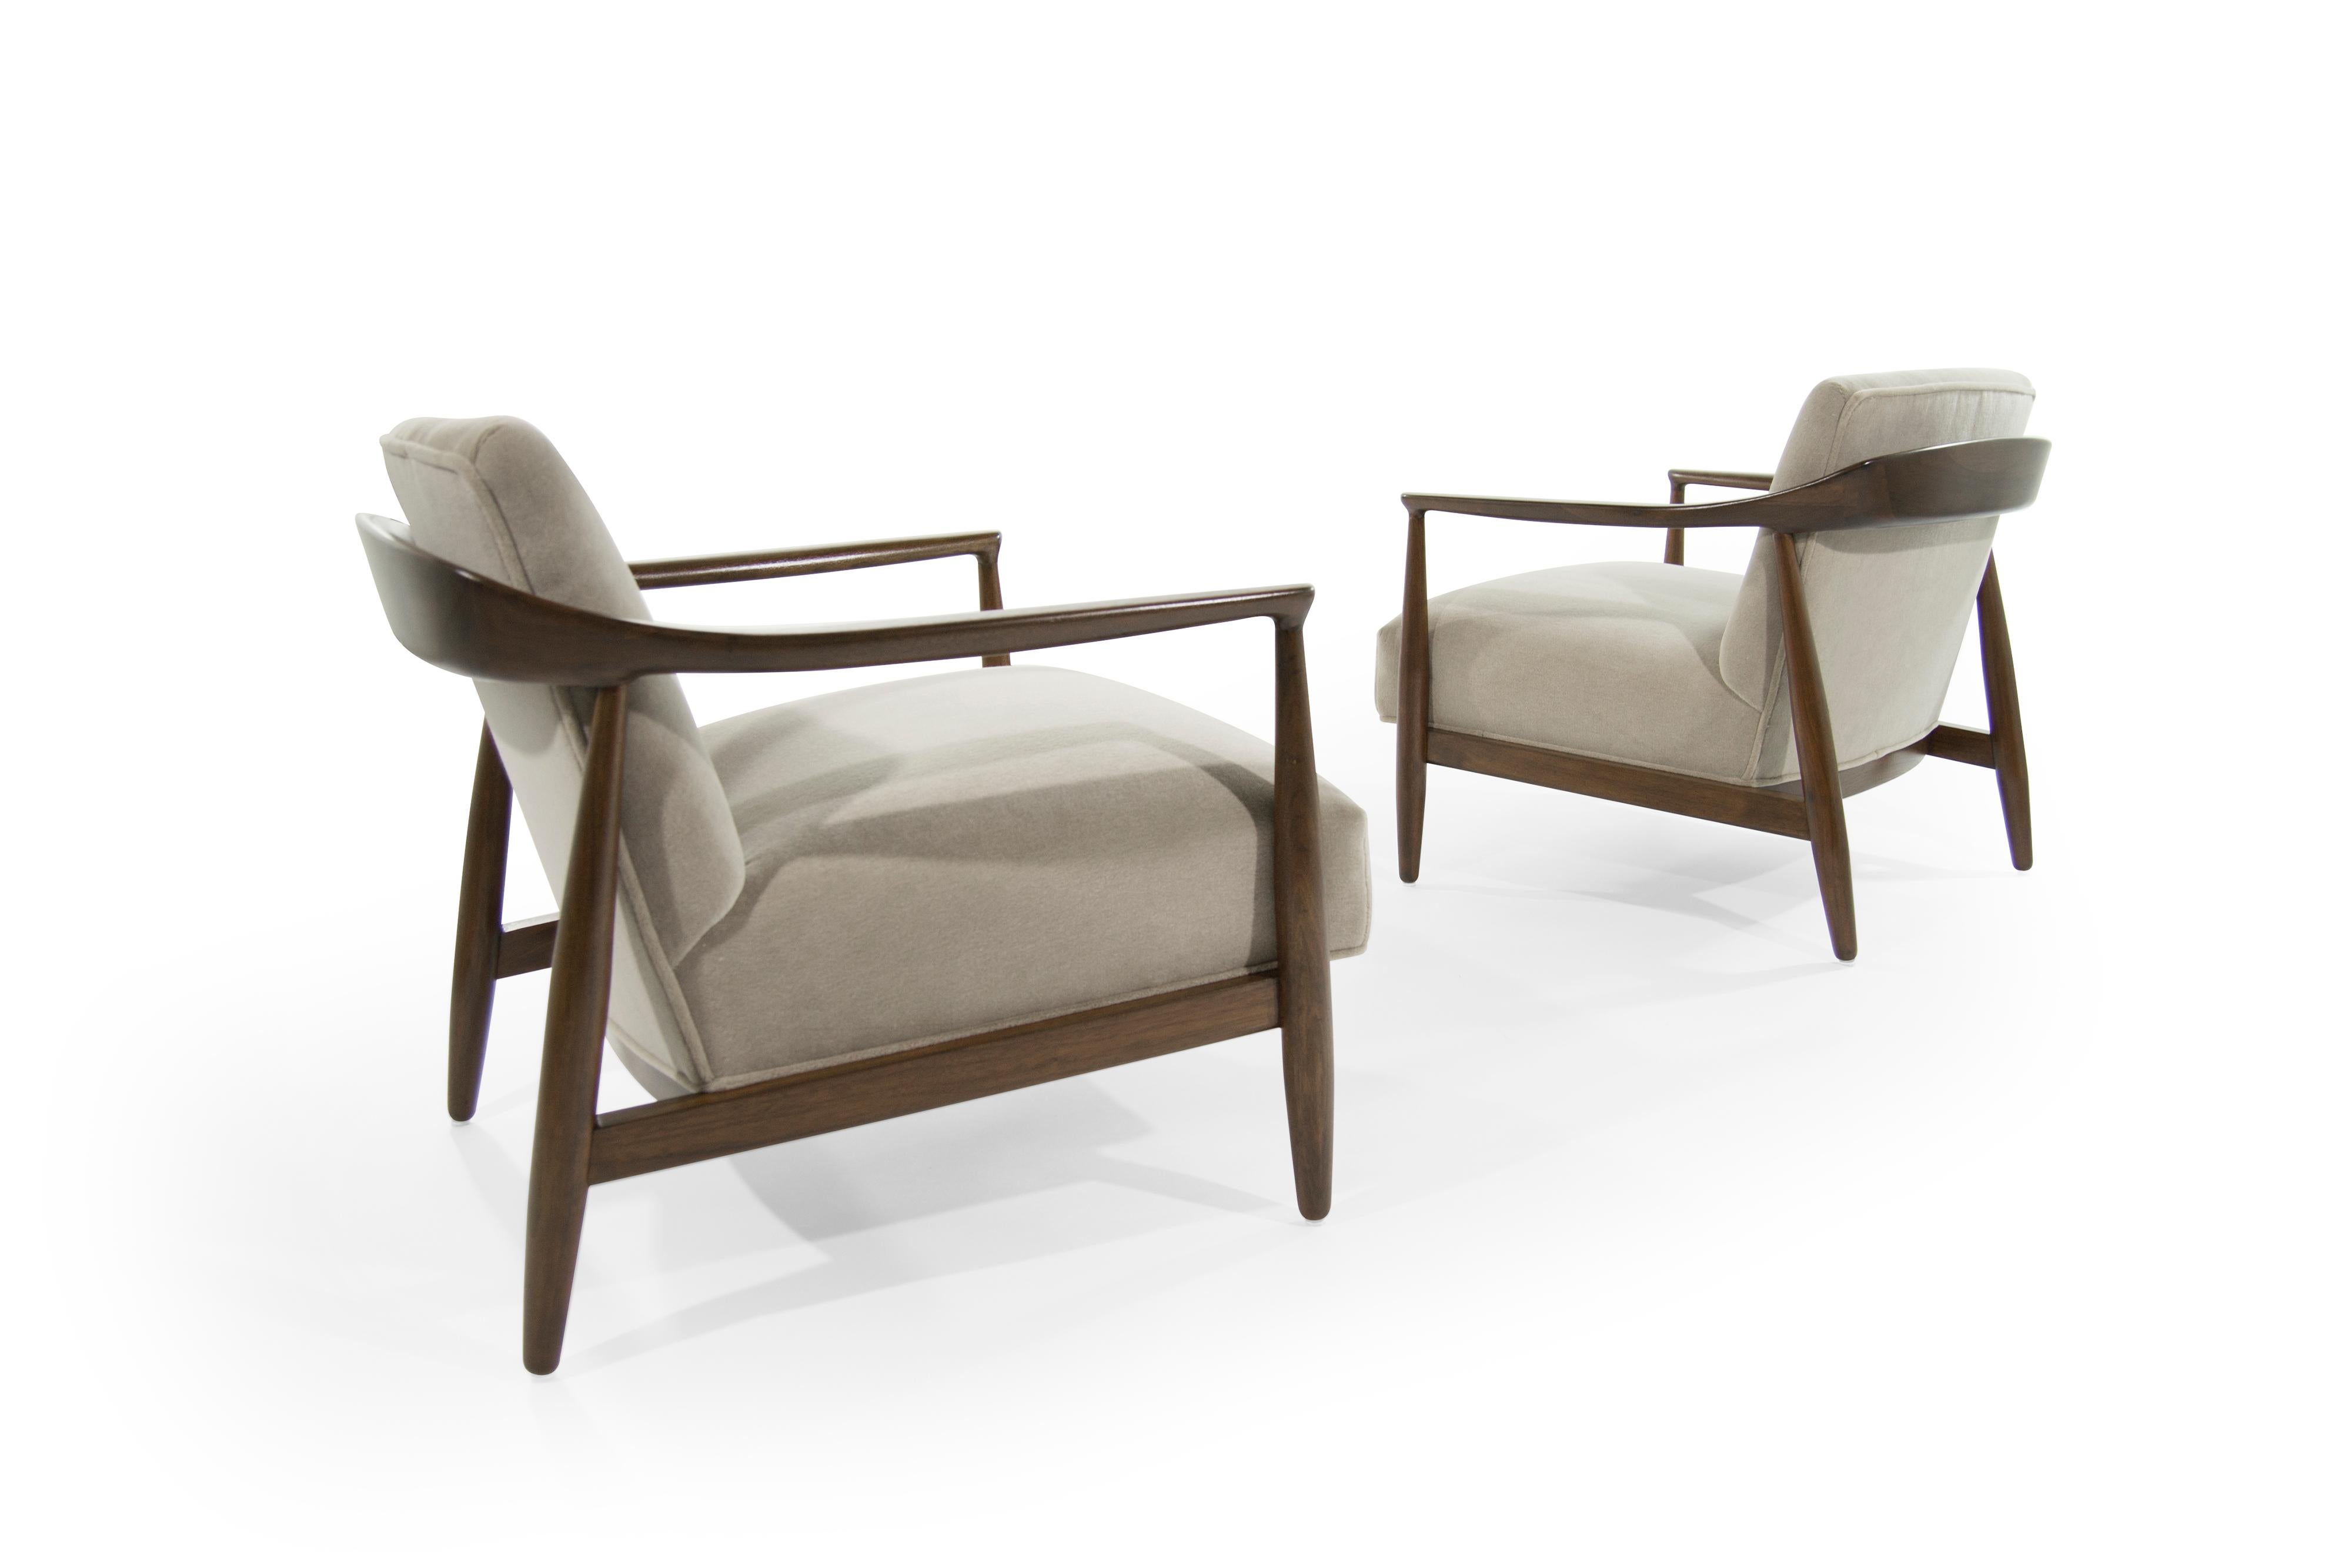 Set of lounge chairs in the style of Ib Kofod-Larsen, Denmark, circa 1950s. Sculptural walnut frames fully restored. Newly upholstered in natural alpaca velvet.